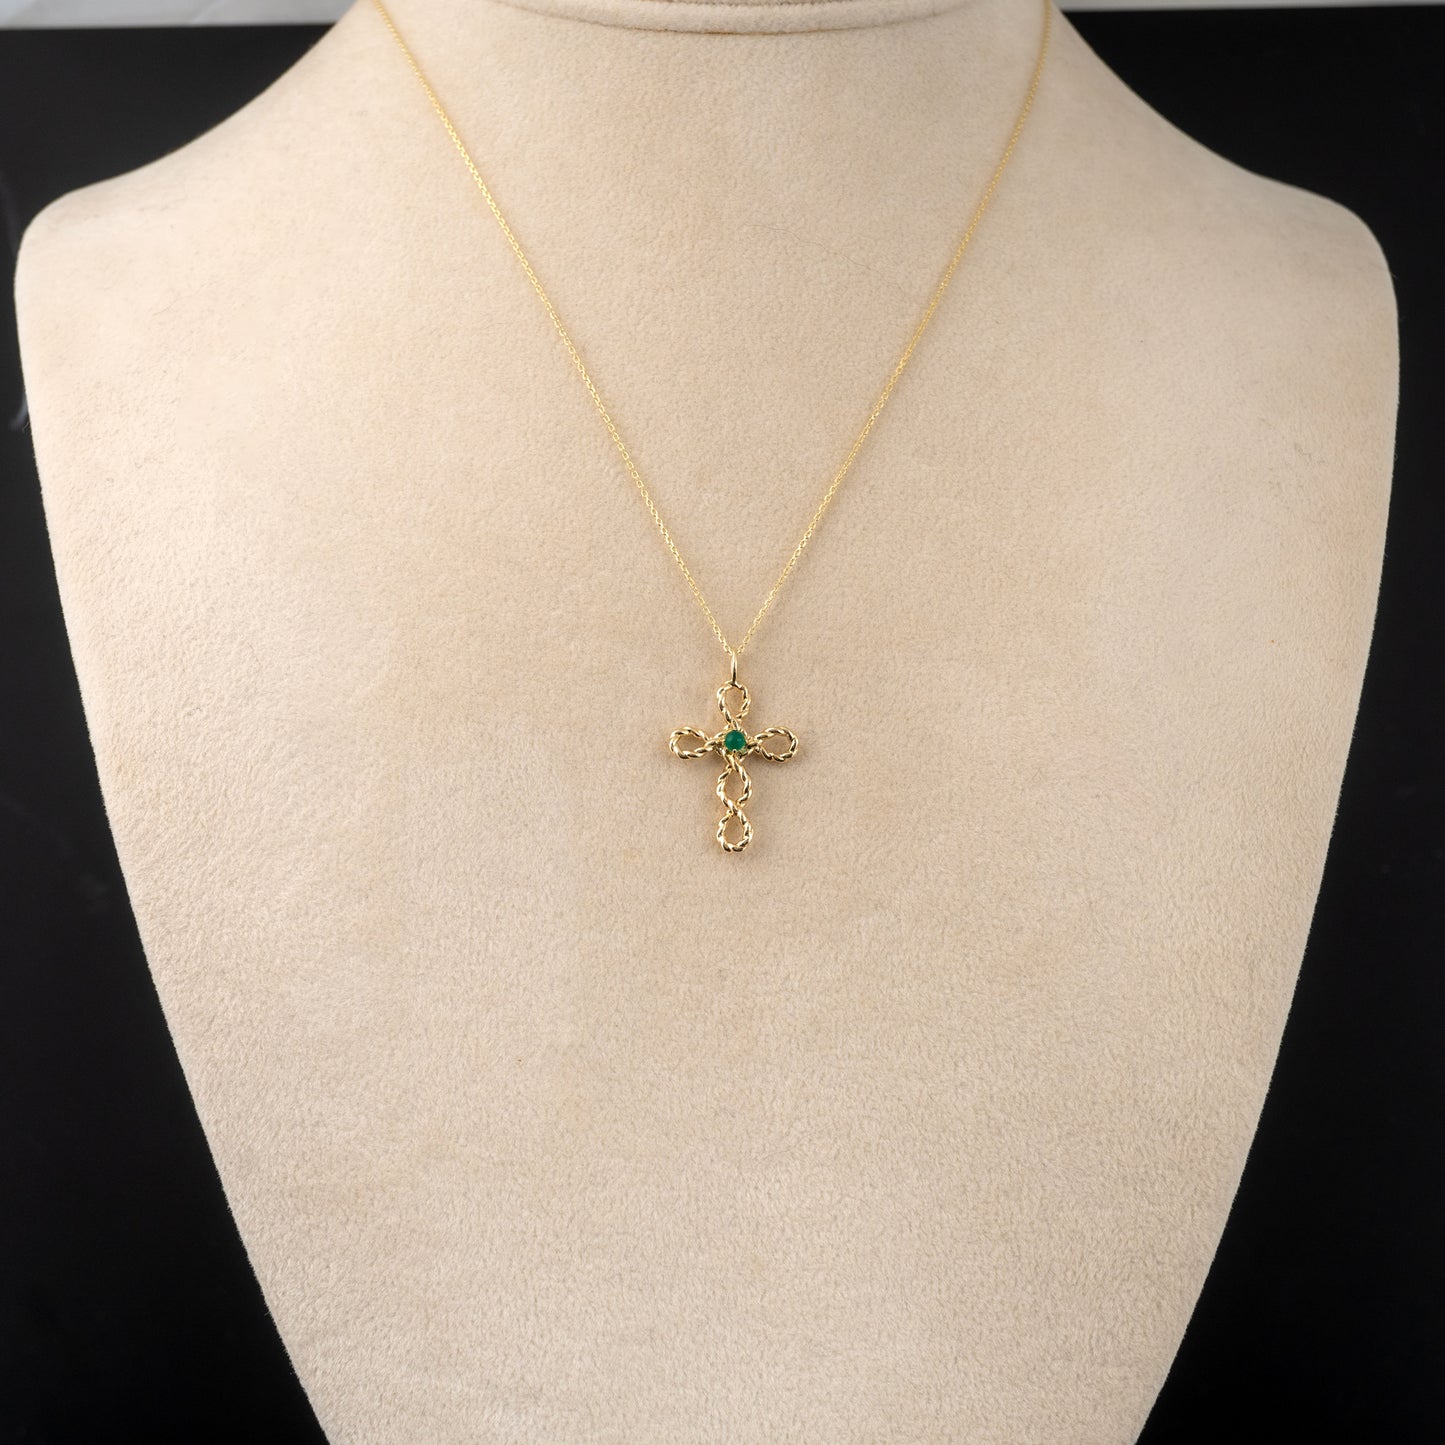 Green Onyx Crucifix Necklace with Gold Belcher Chain